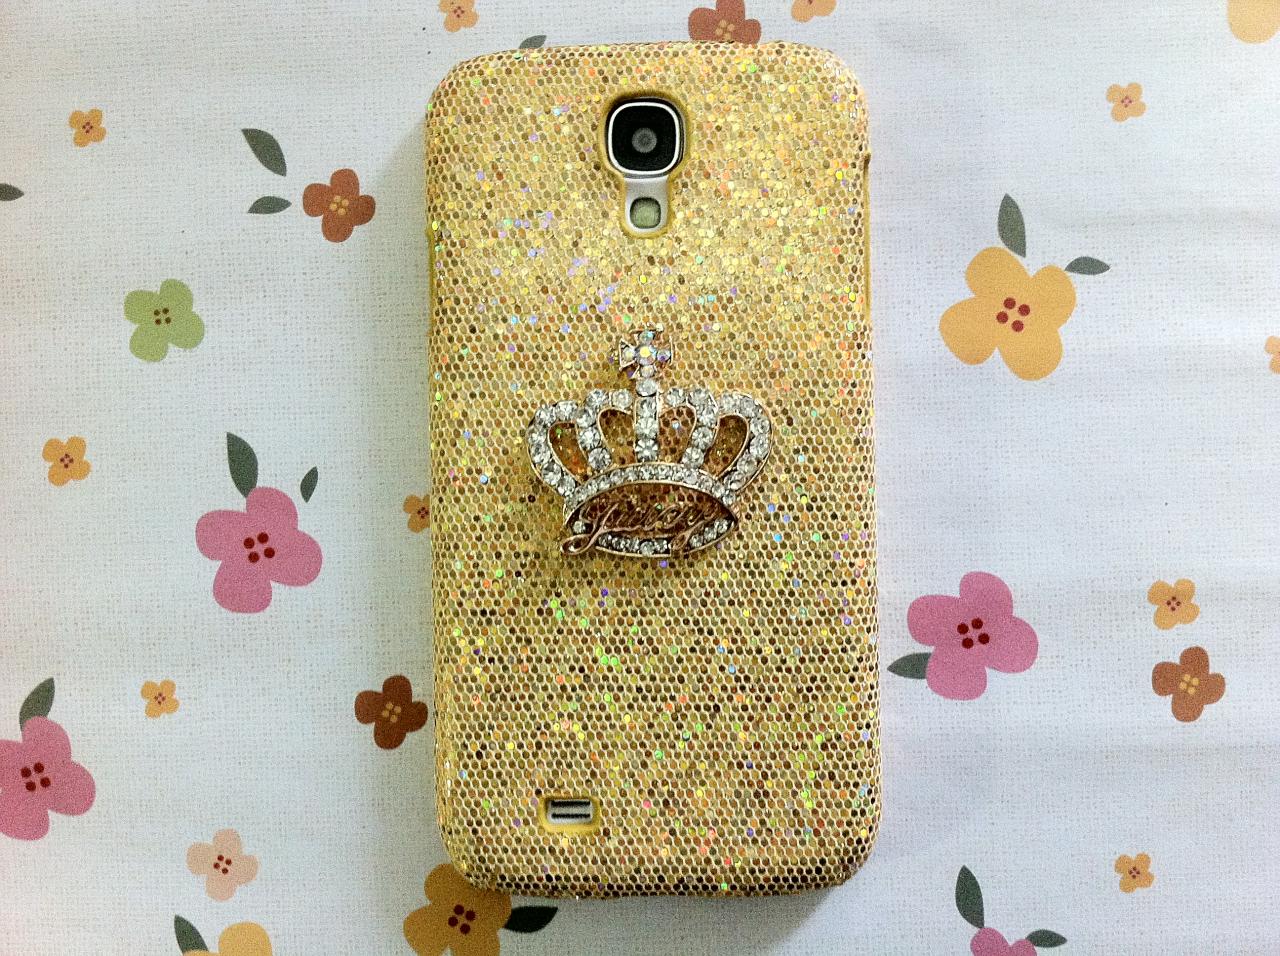 Chic Luxury Bling Crystal Silver Crown Sparkle Samsung Galaxy S4 I9500 Case